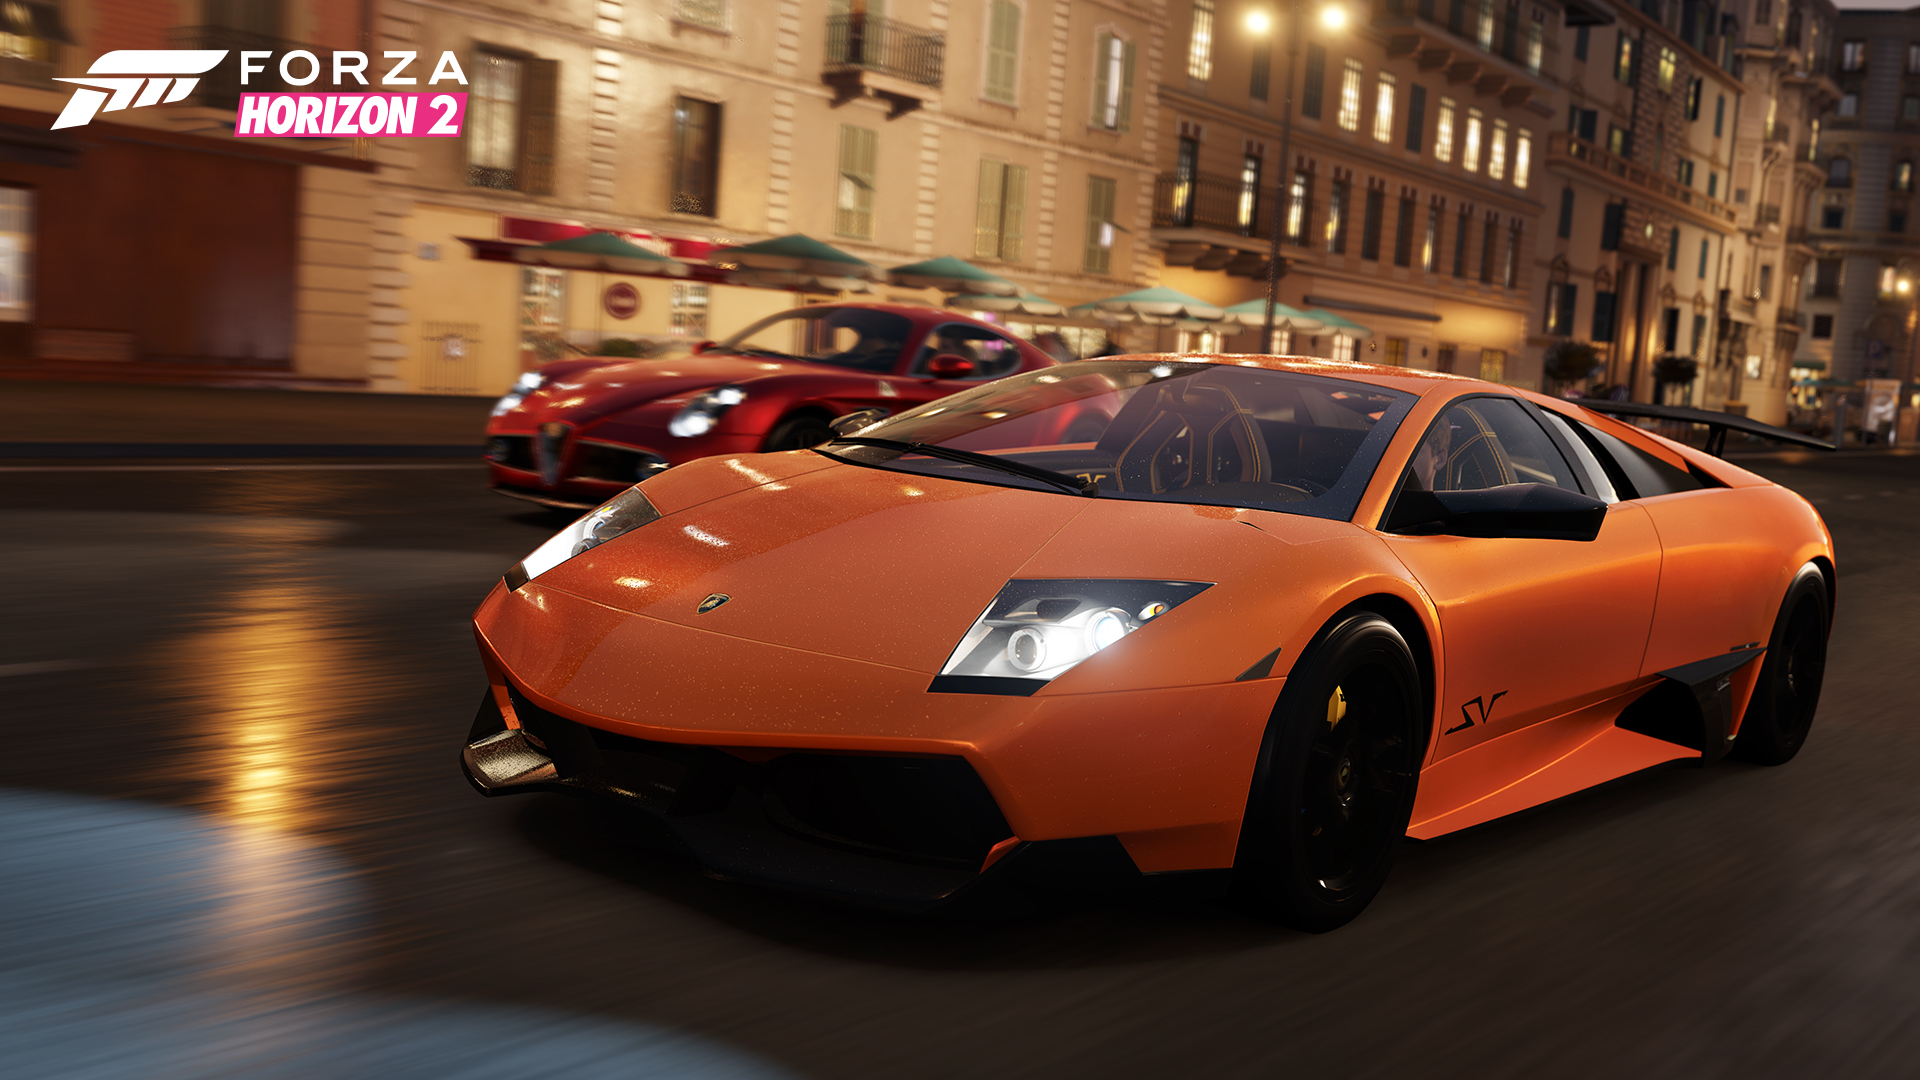 Forza Horizon 2 Backgrounds on Wallpapers Vista